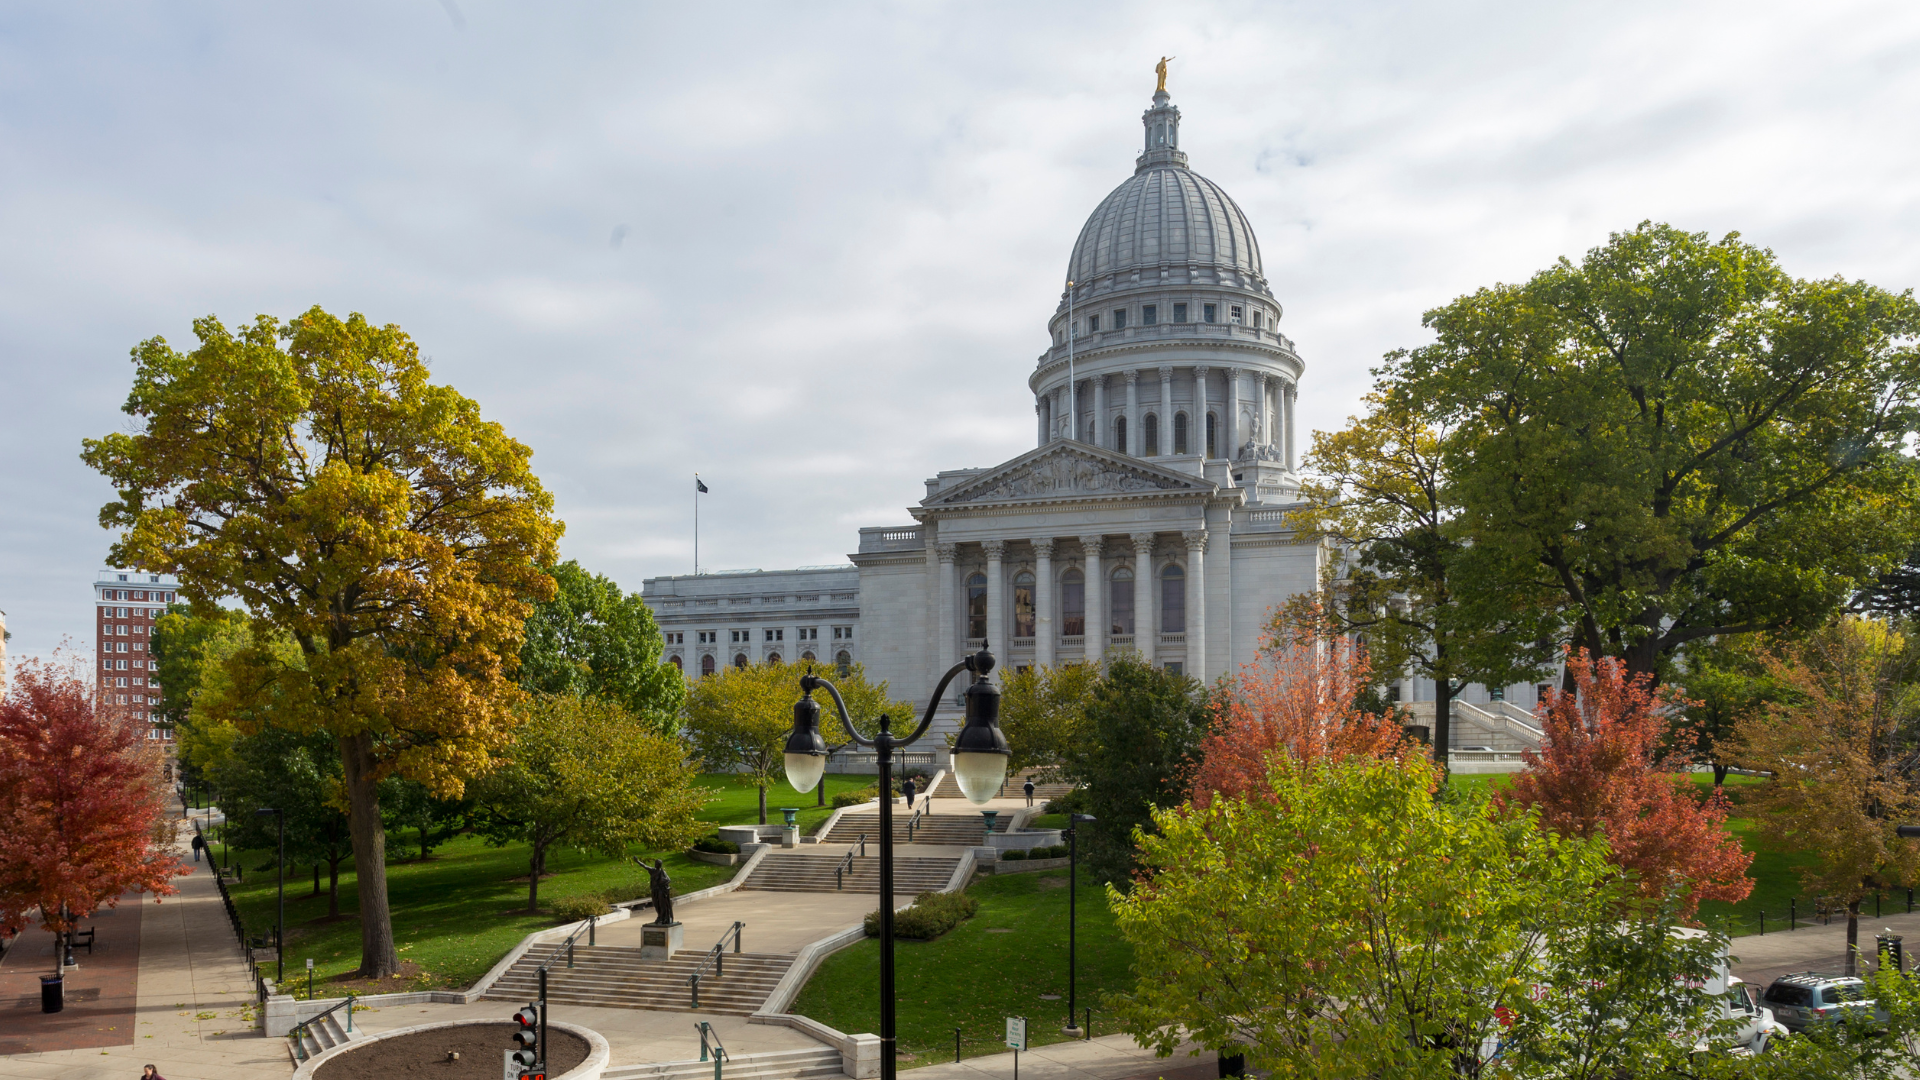 Wisconsin capitol building with fall green, red and yellow leaves on the trees surrounding it